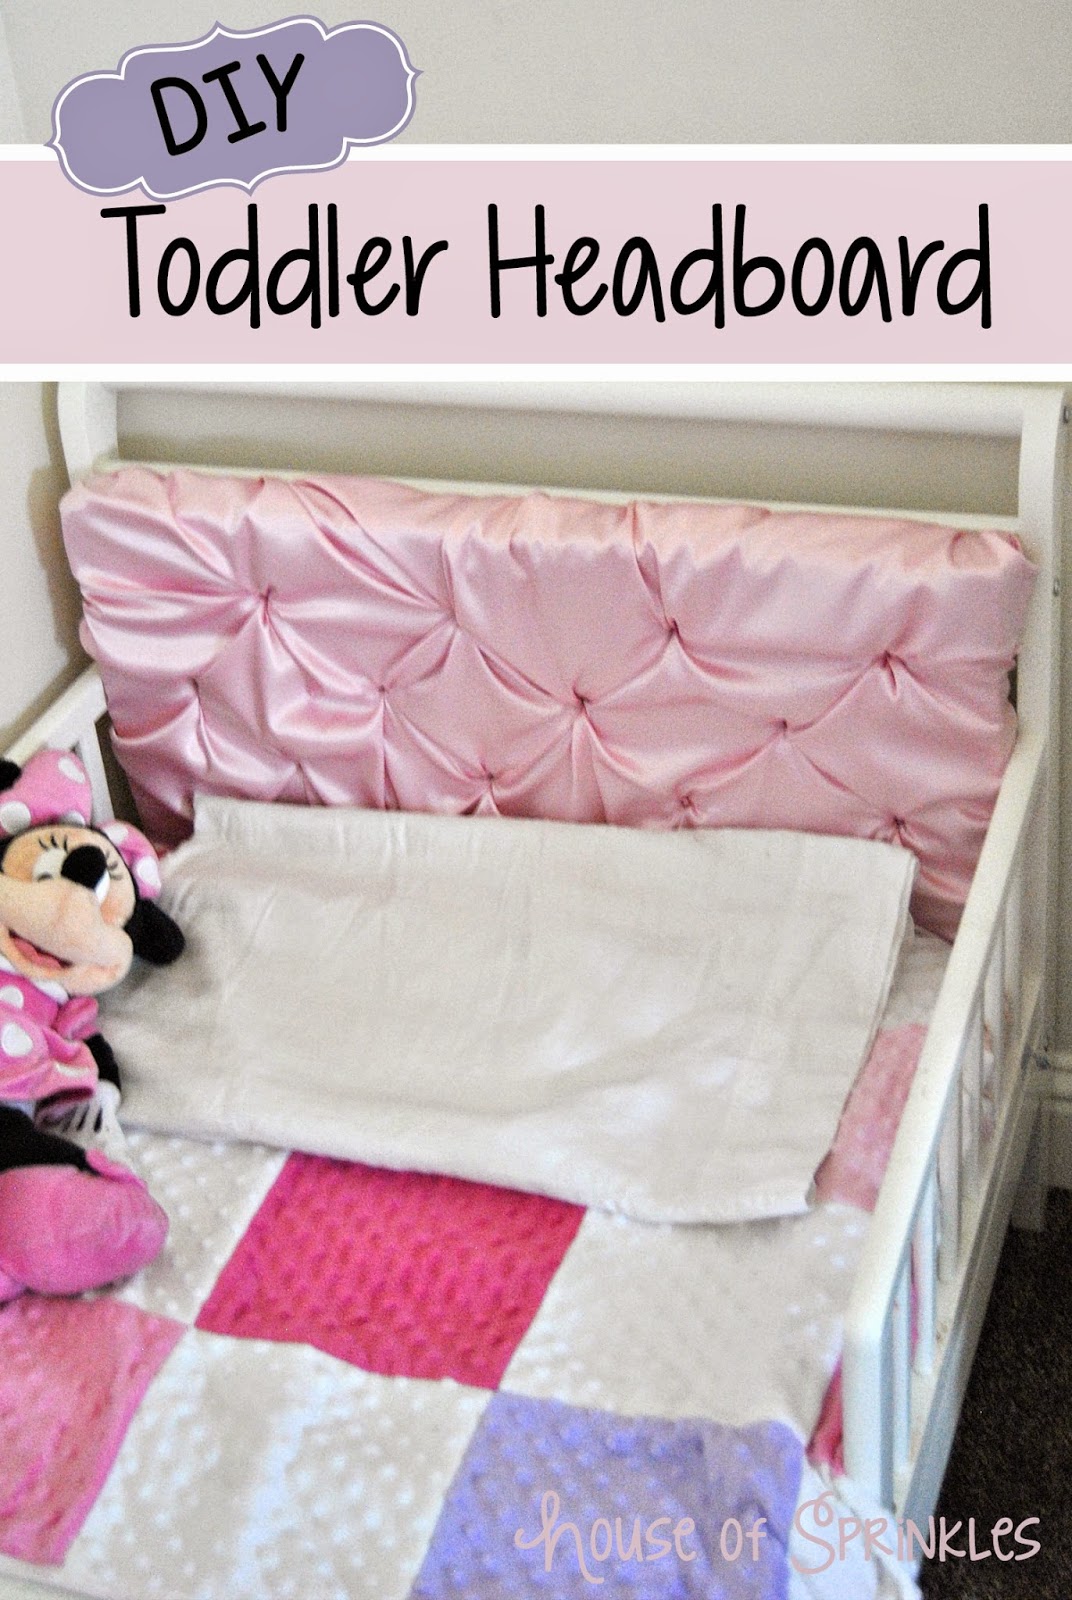 DIY diy Sprinkles: headboard Toddler House with Headboard for toddler  of Foamology